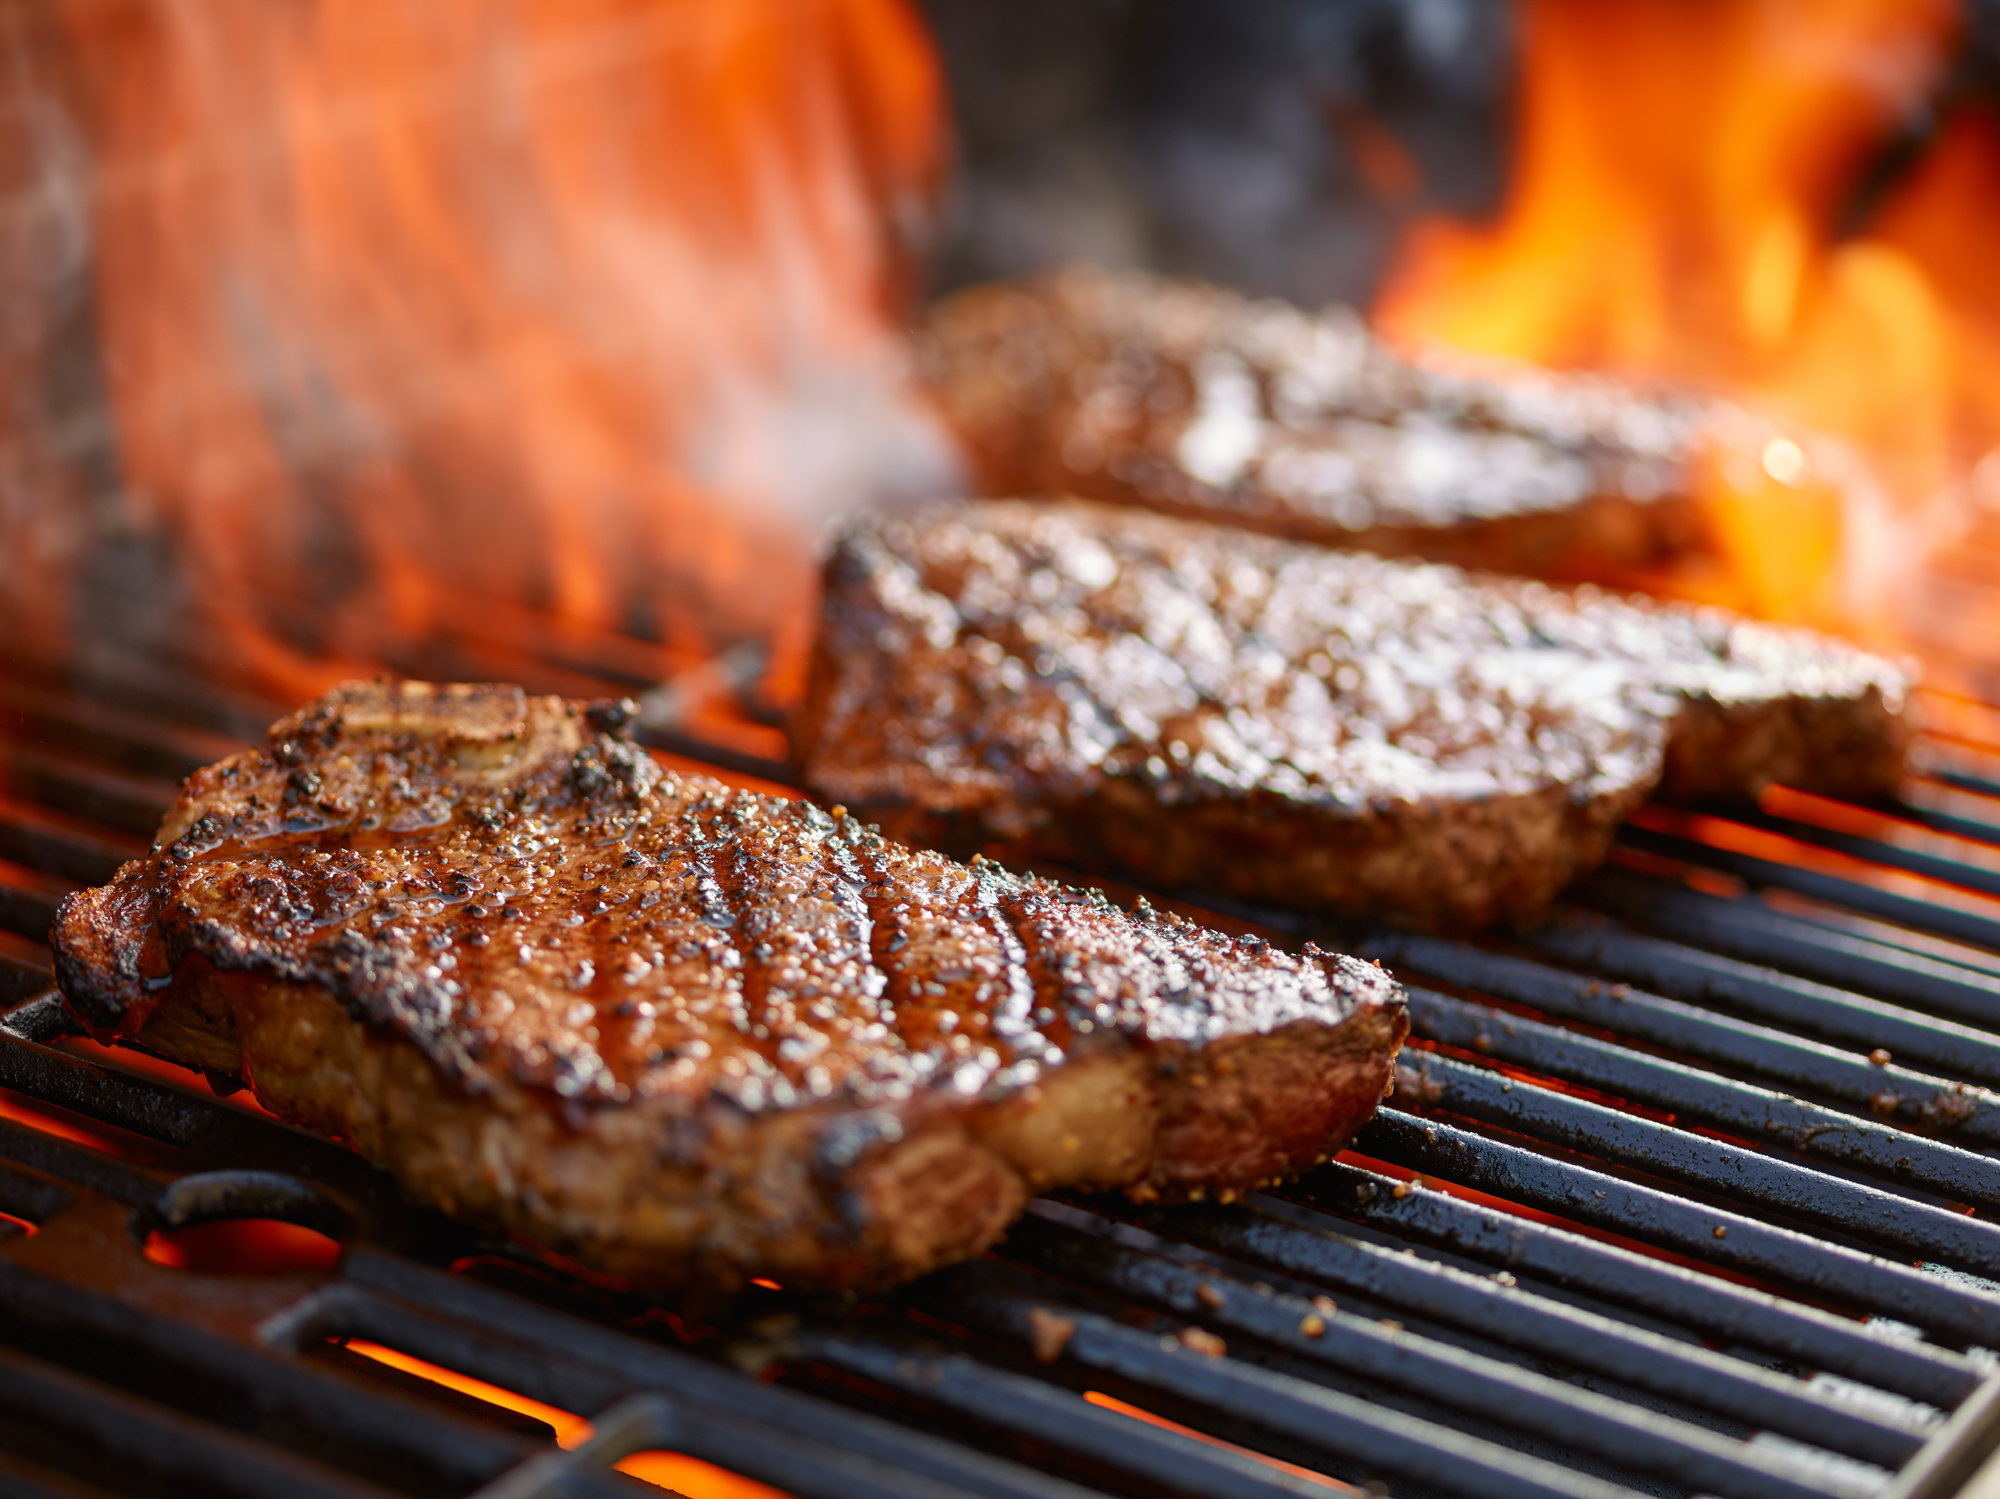 Grilling steaks on flaming grill (Photo: iStock - rez-art)